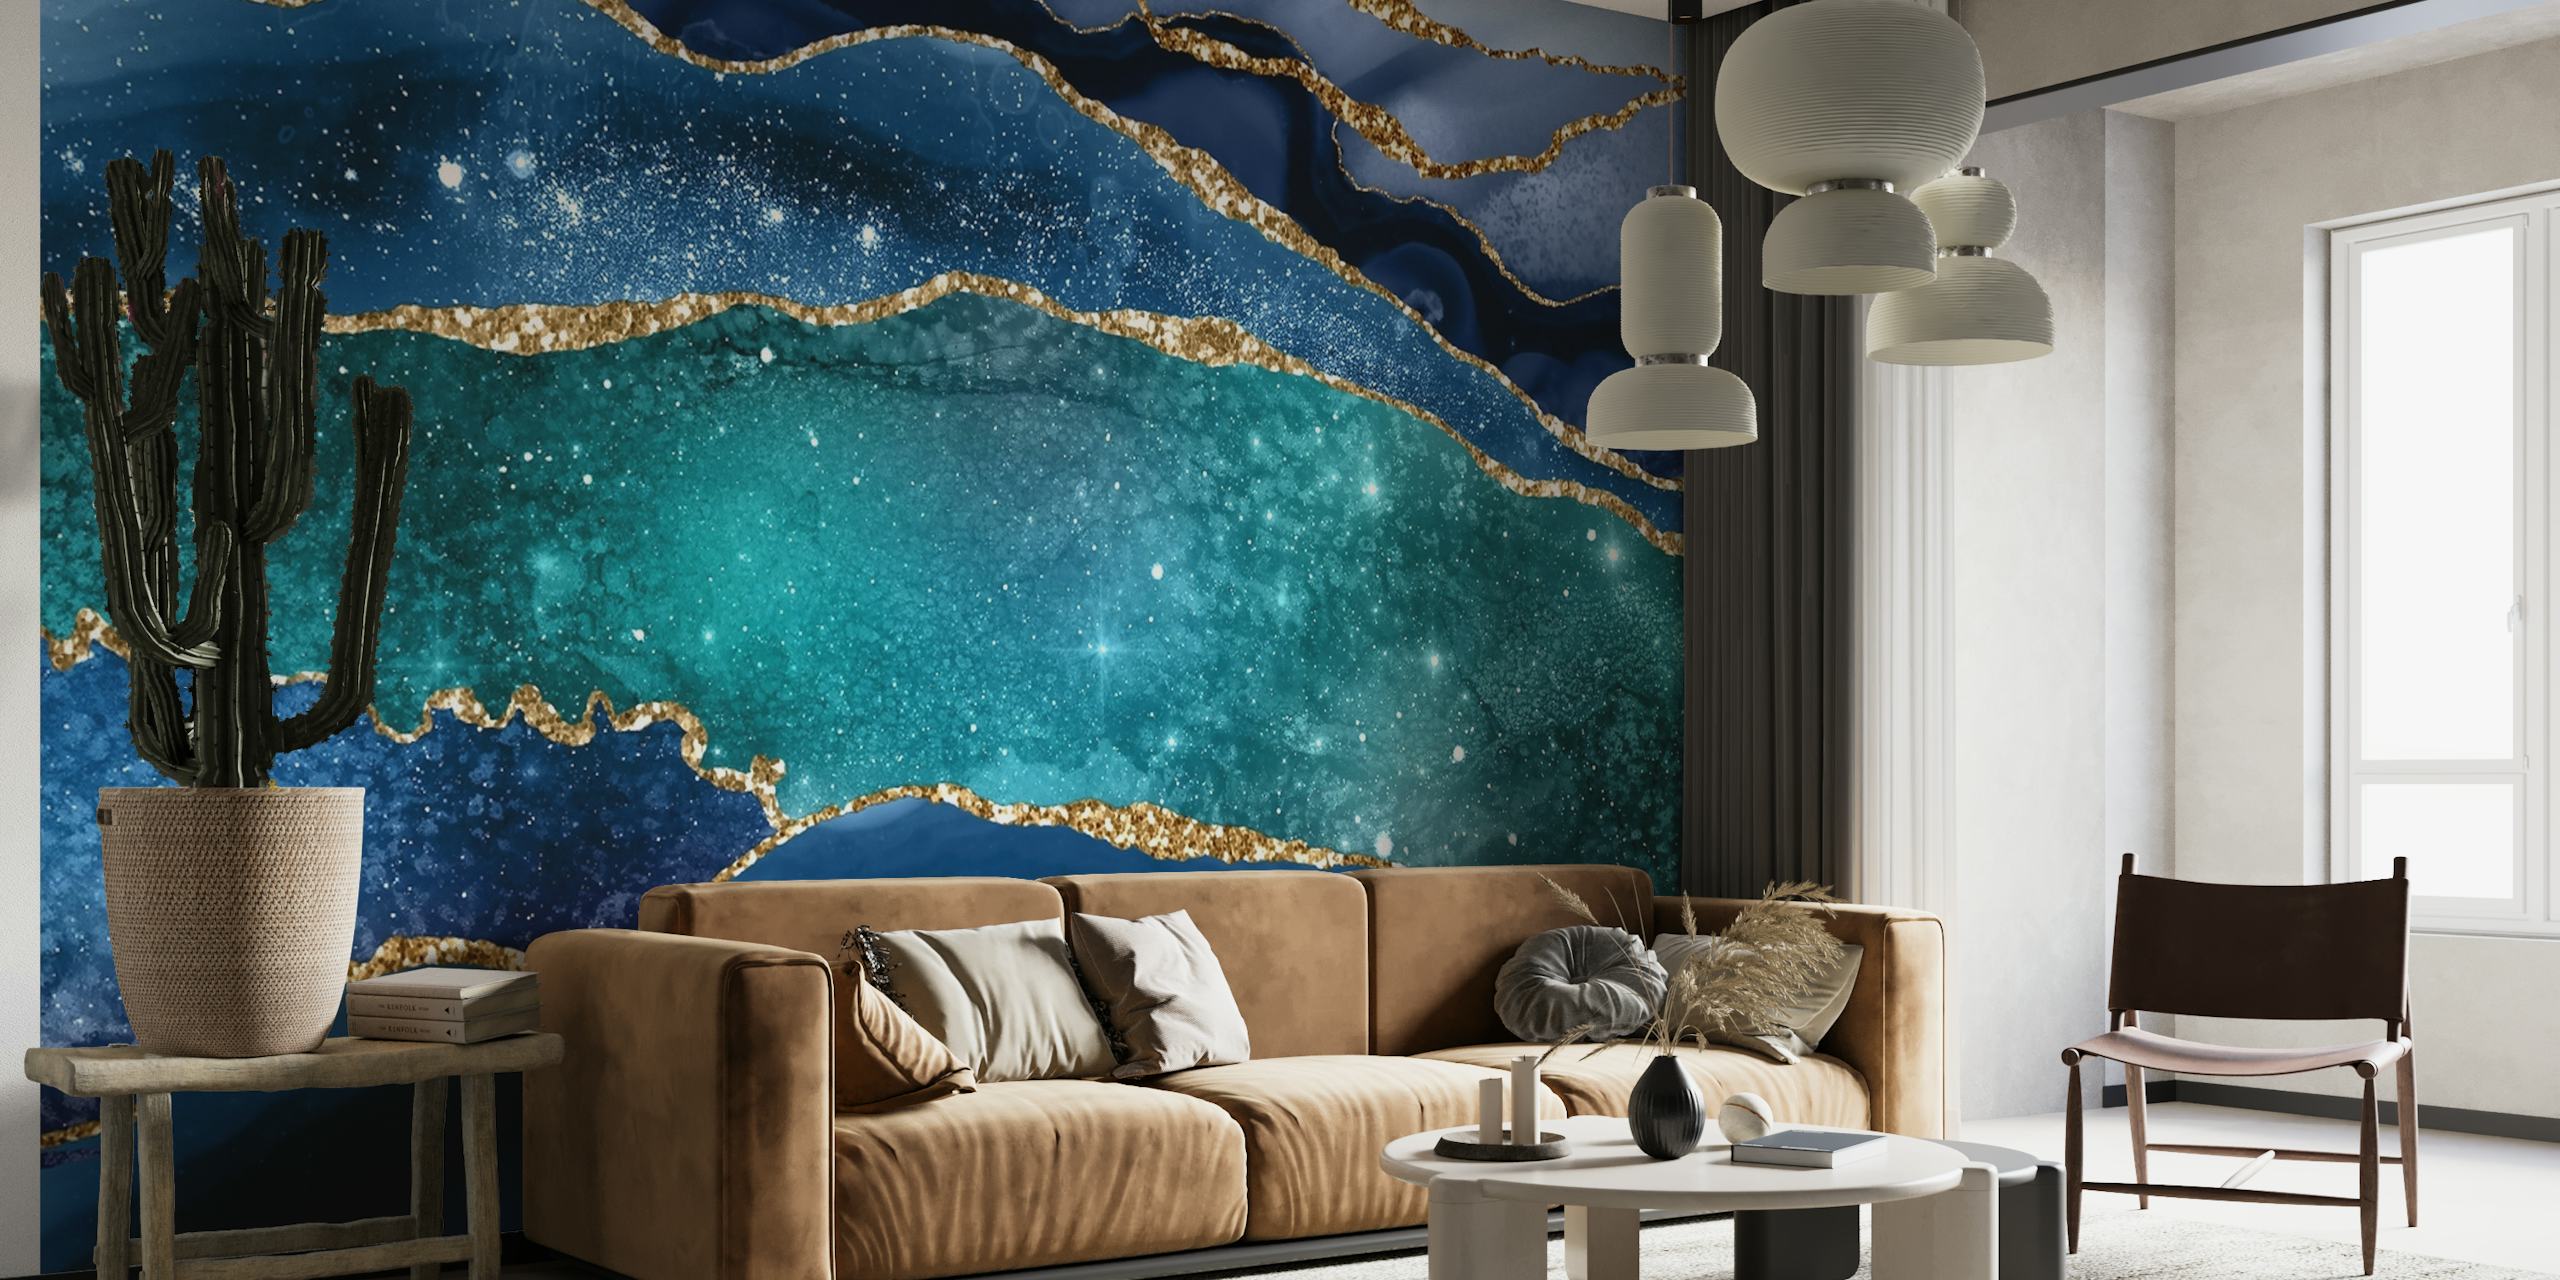 Galactic themed marble texture with golden veins resembling a starry night sky